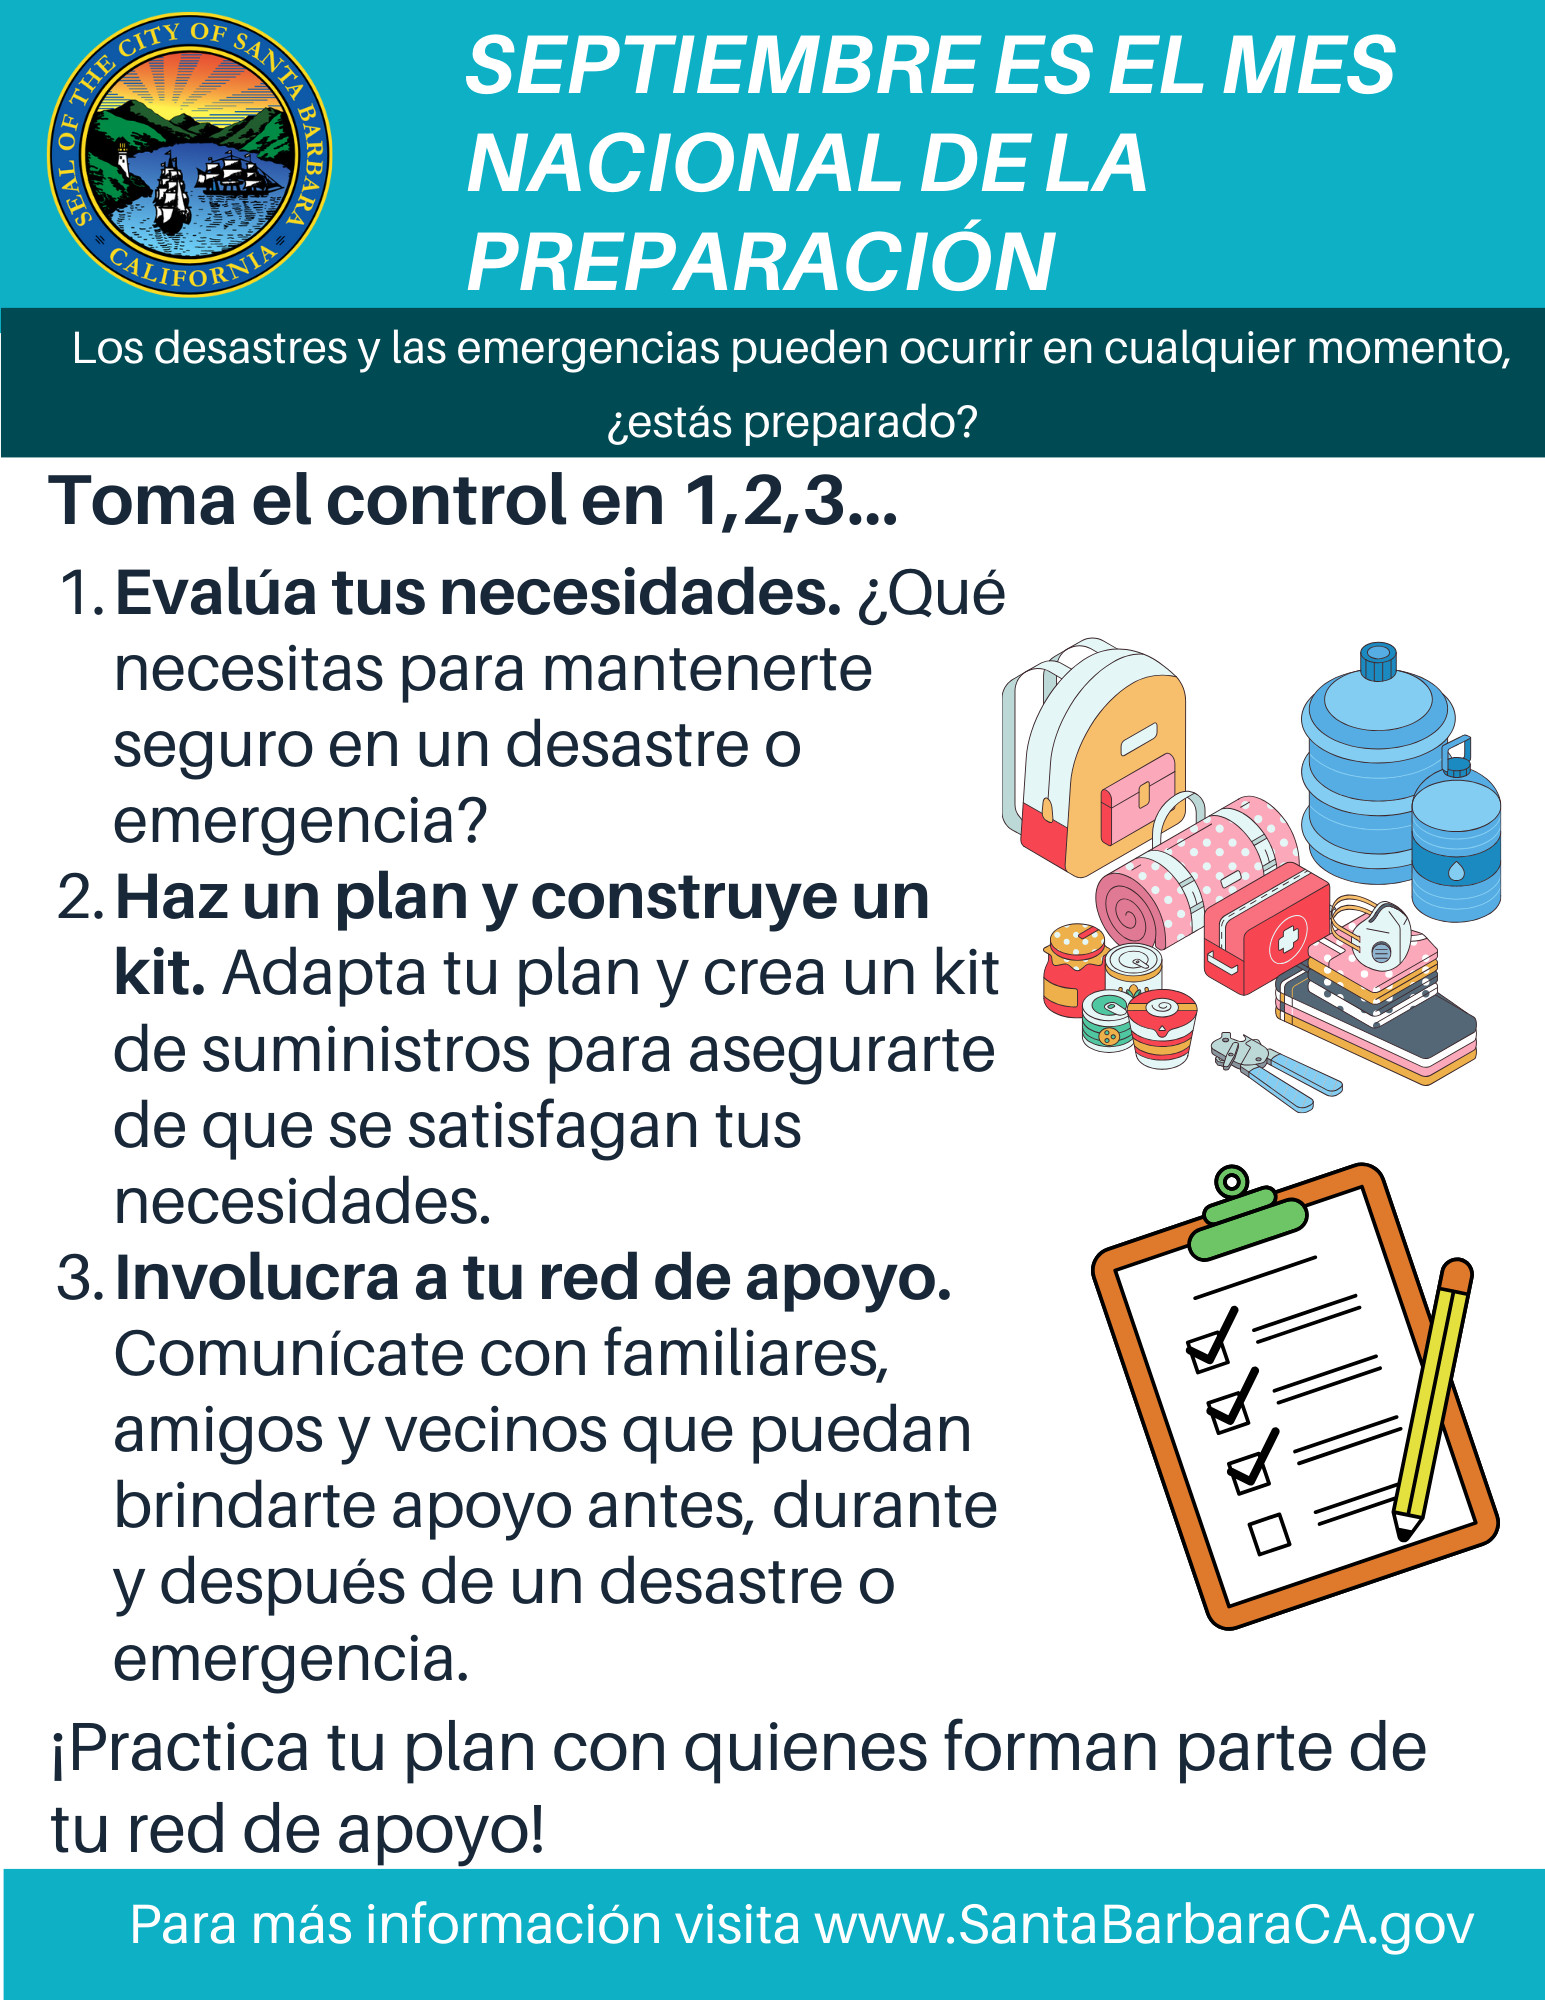 Info graphic detailing the 1,2,3 steps in the press release in Spanish